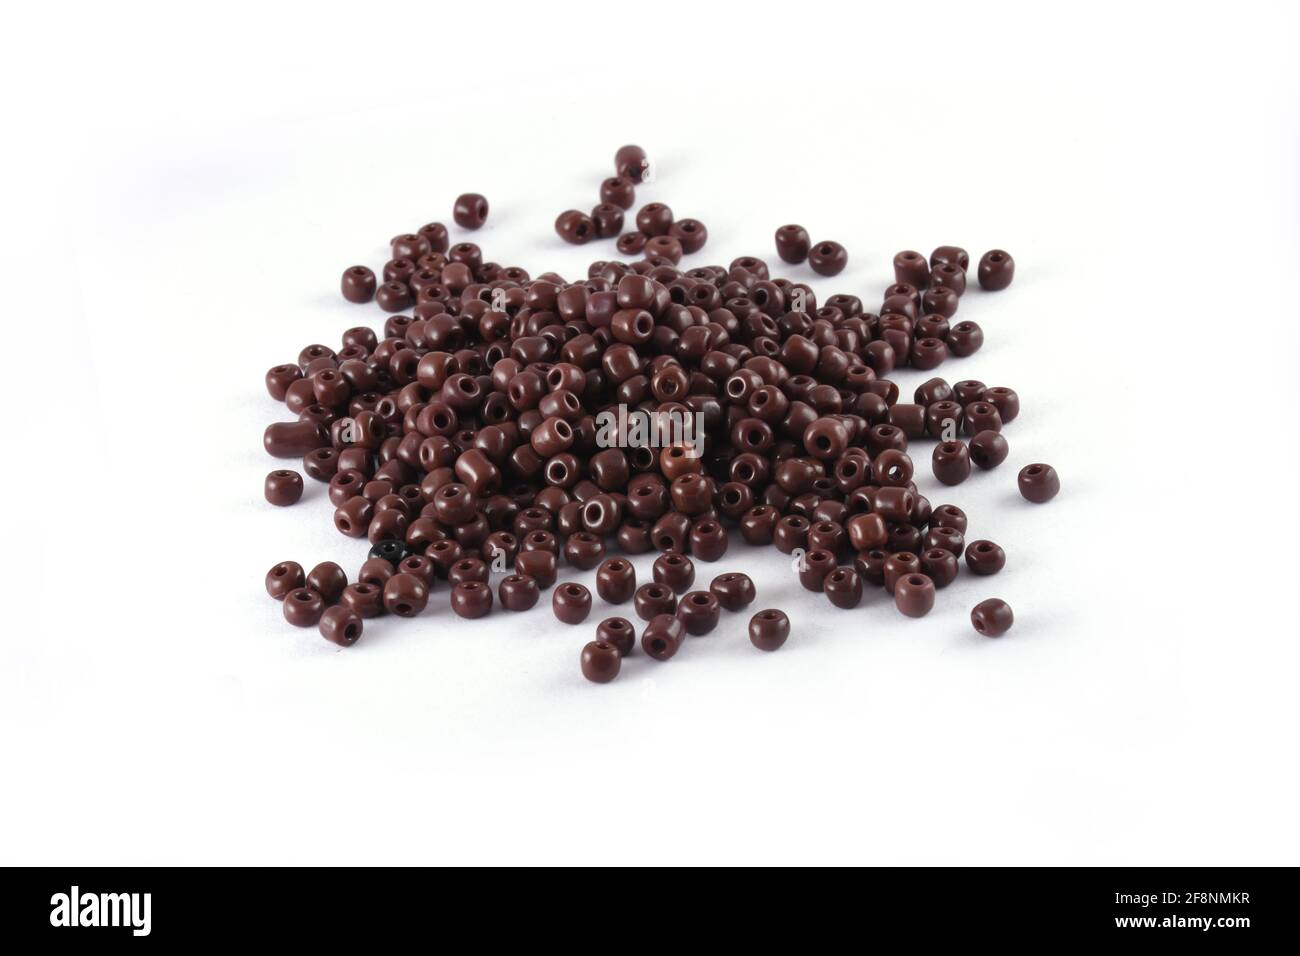 Beads spread on white background Background Close up, macro, make bead necklace or Bead Crochet Daily Beading Stock Photo